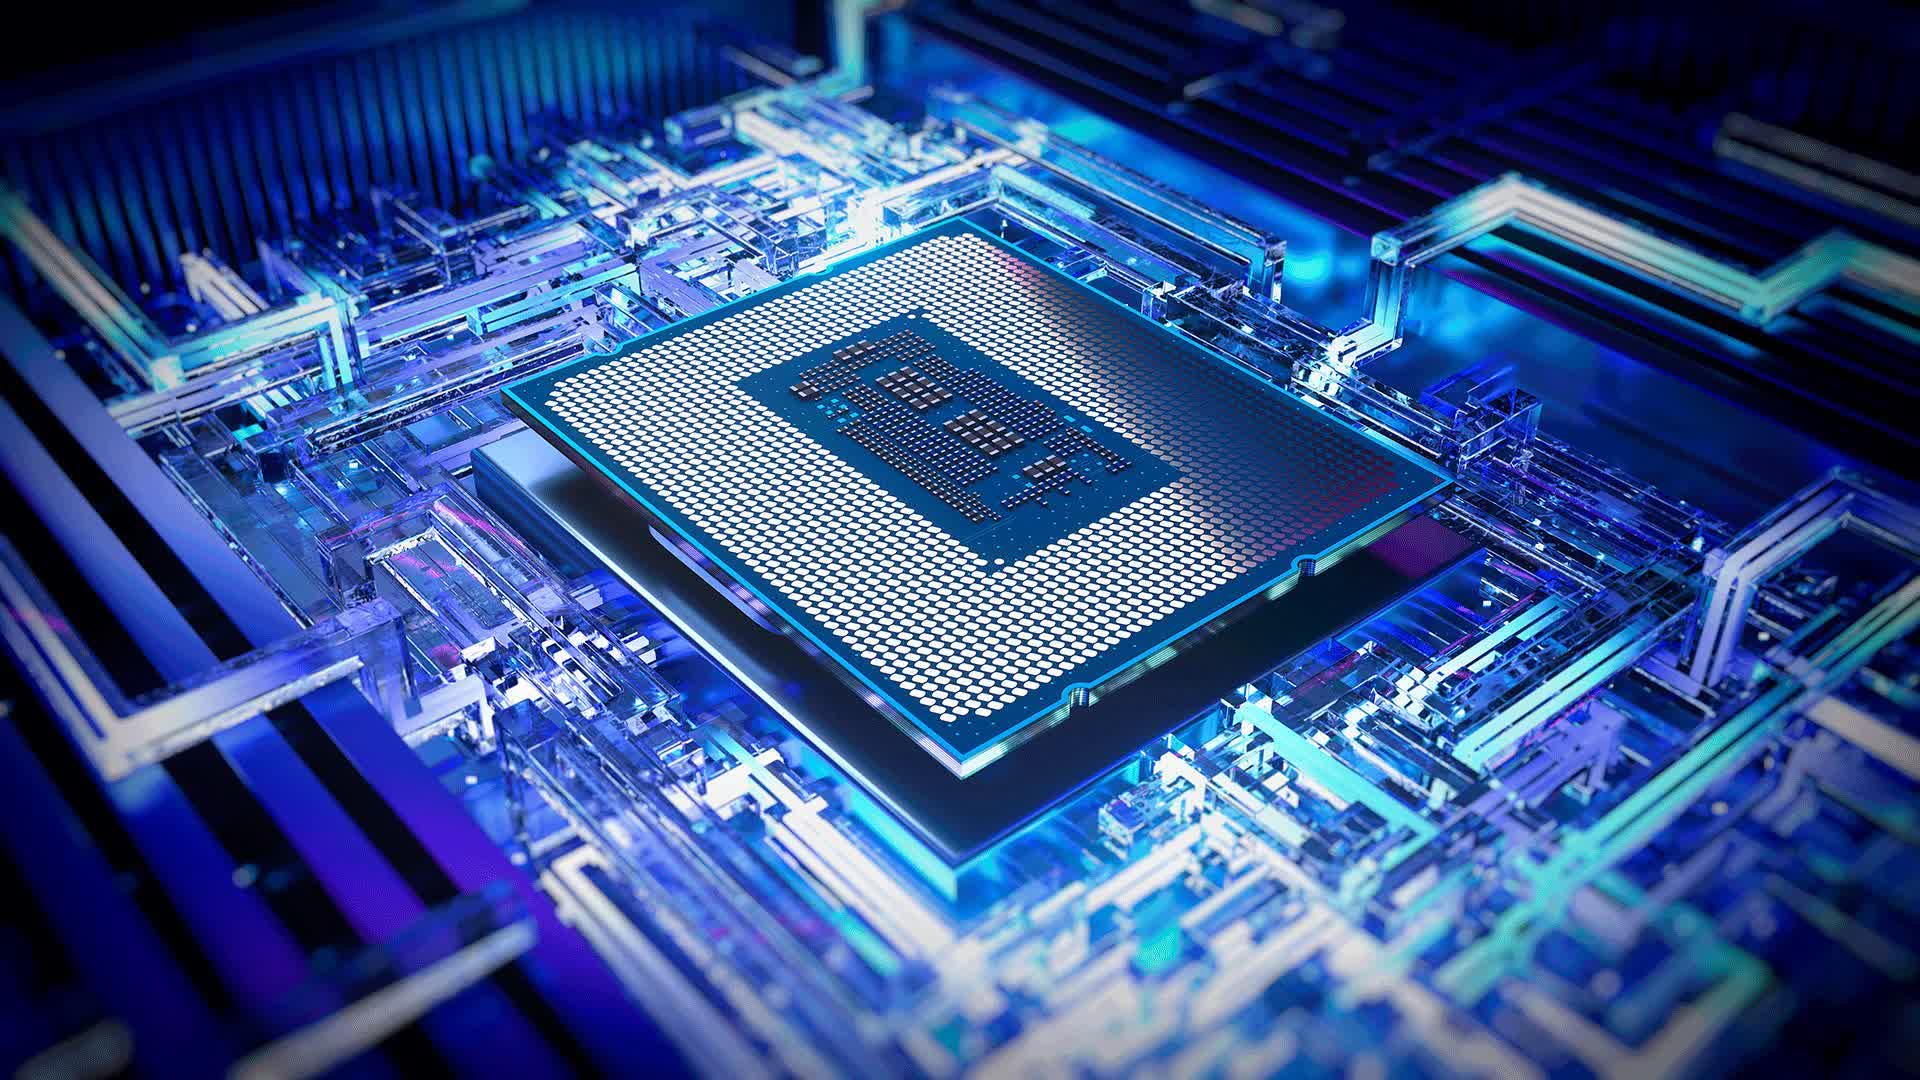 Intel to launch several new CPUs at CES next month, workstation and data center lineups later